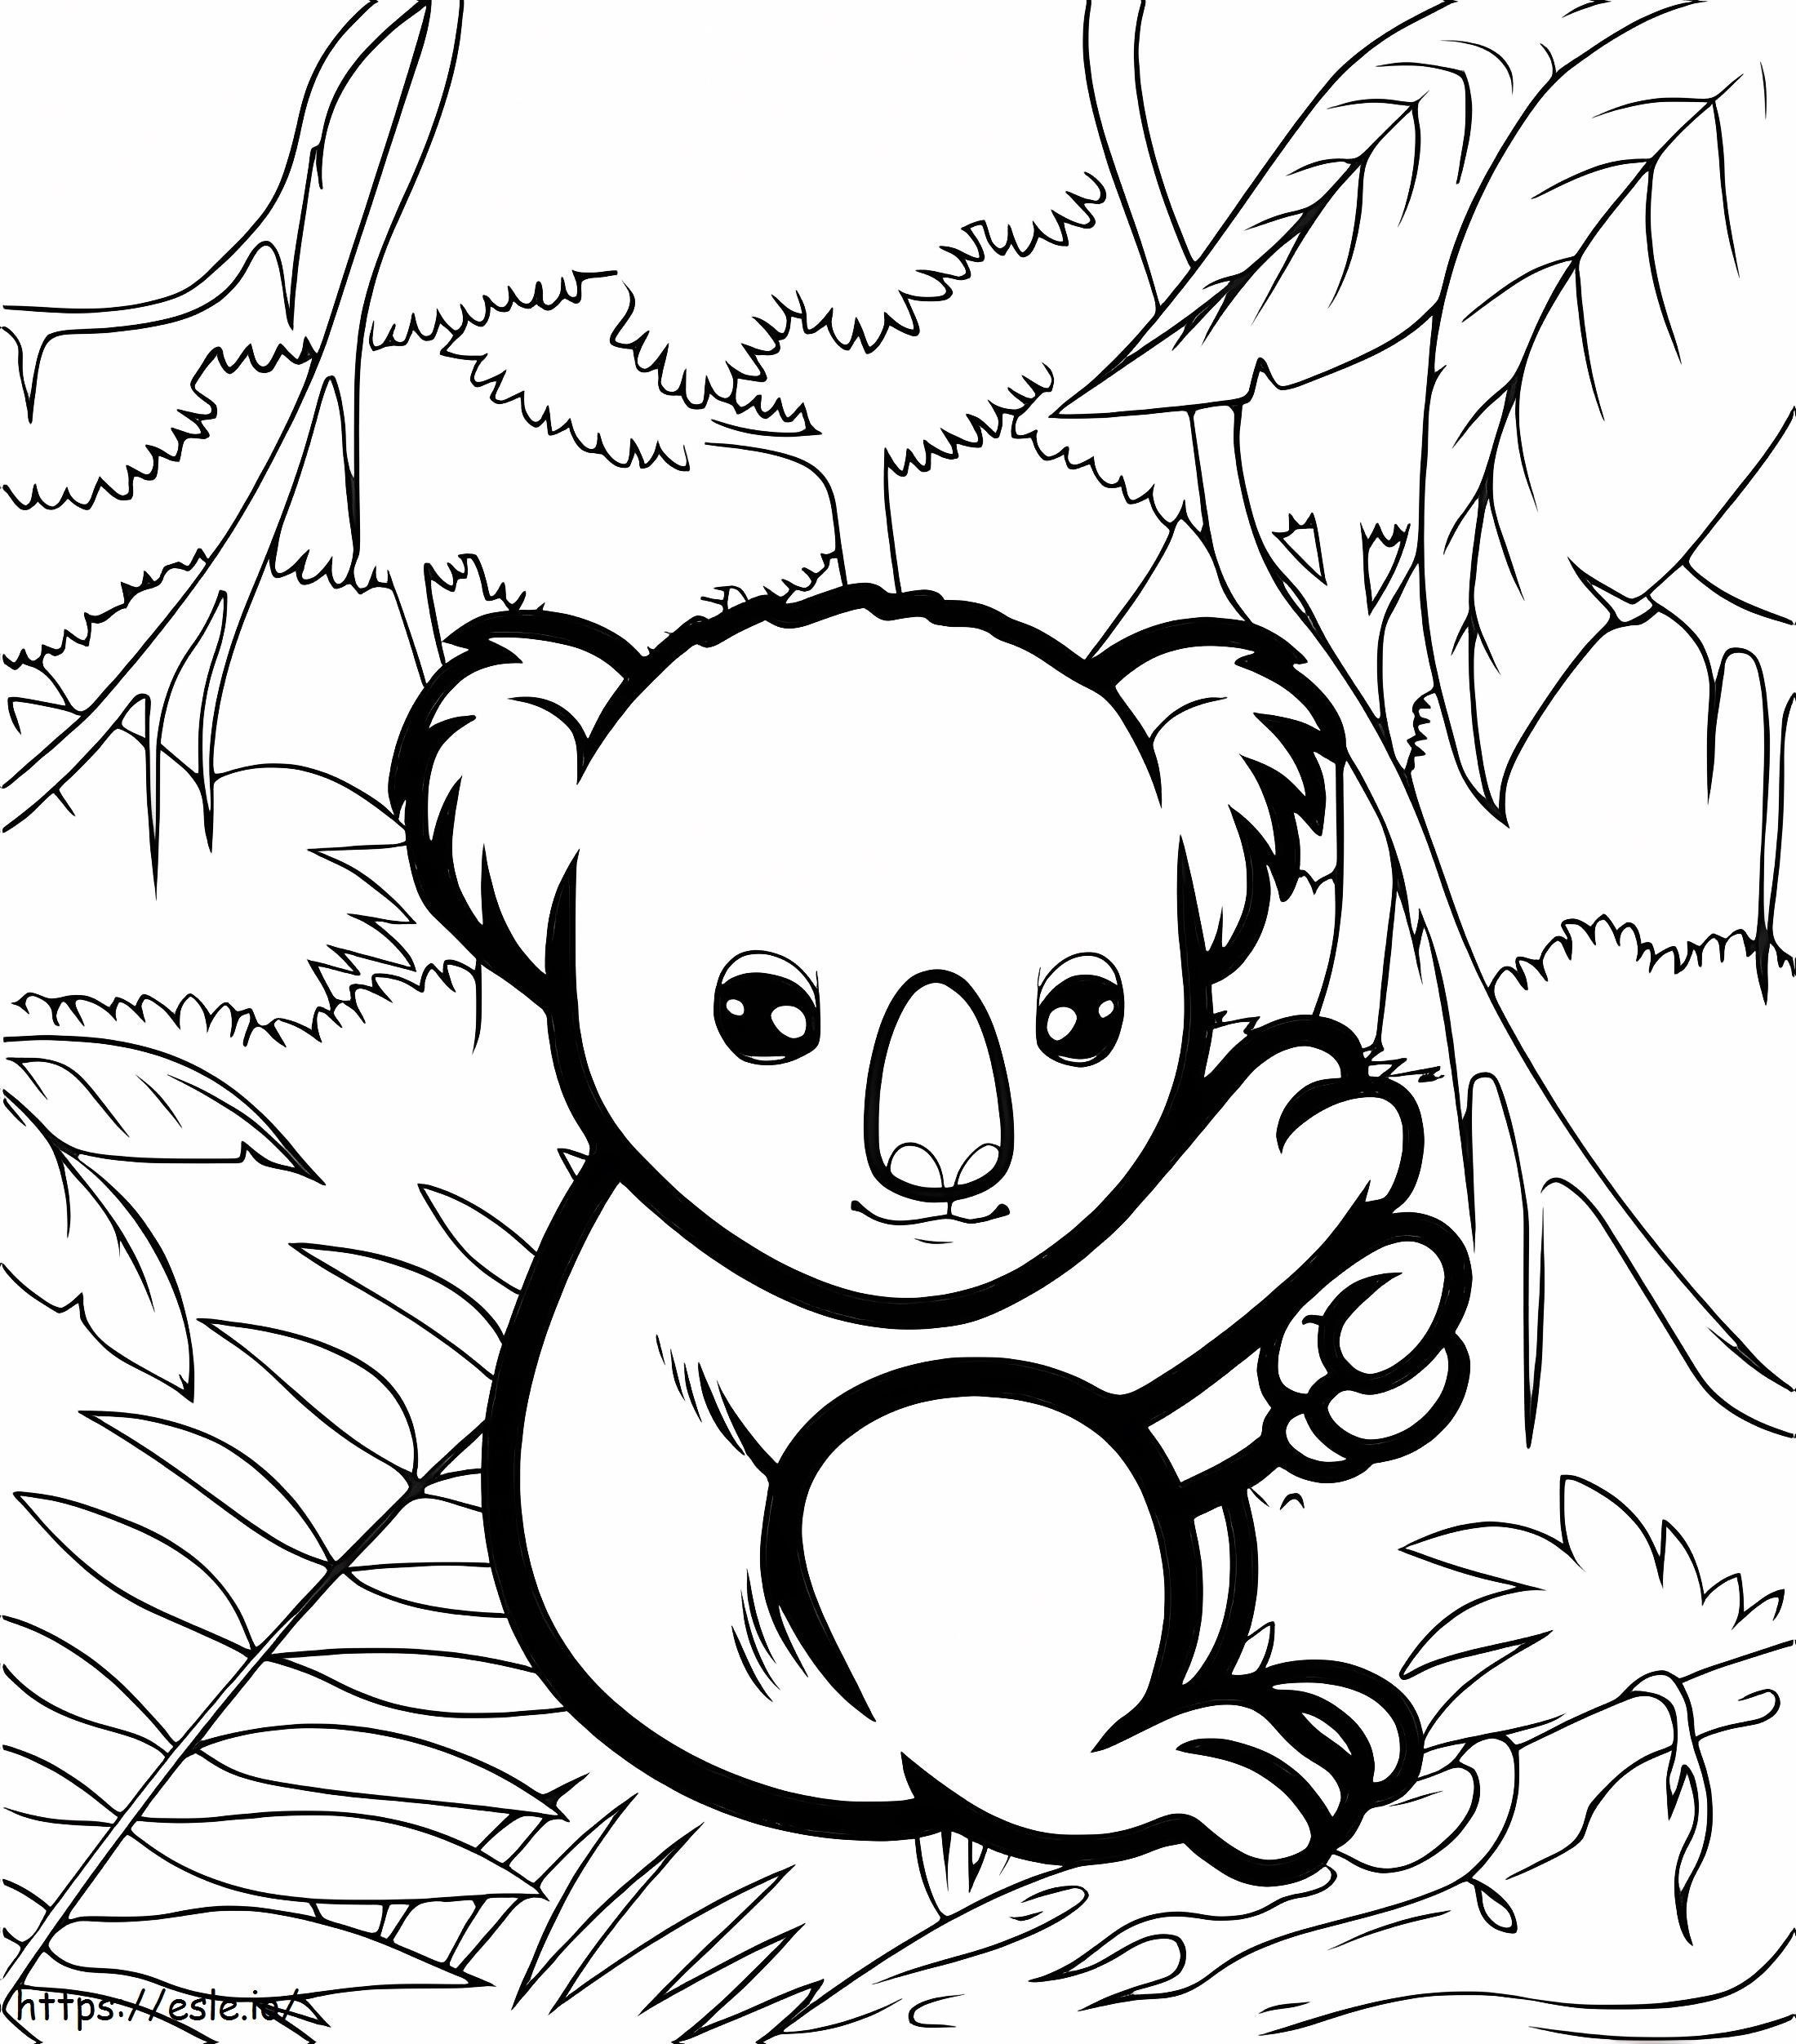 Koala With Leaves coloring page